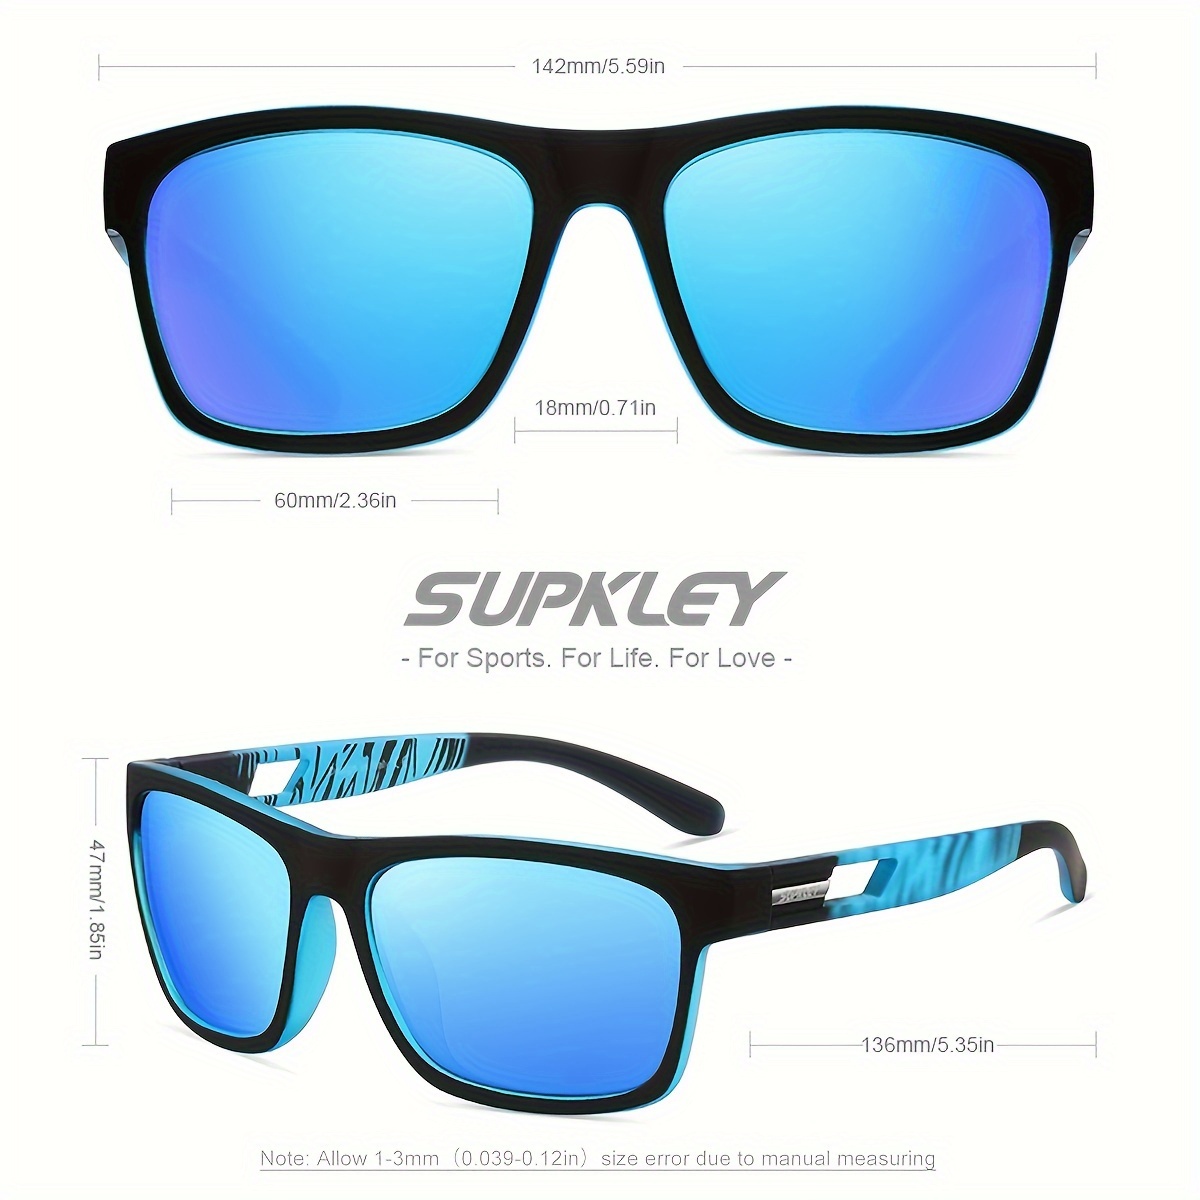 Supkley Cool Sports Polarized Sunglasses Lightweight Cycling